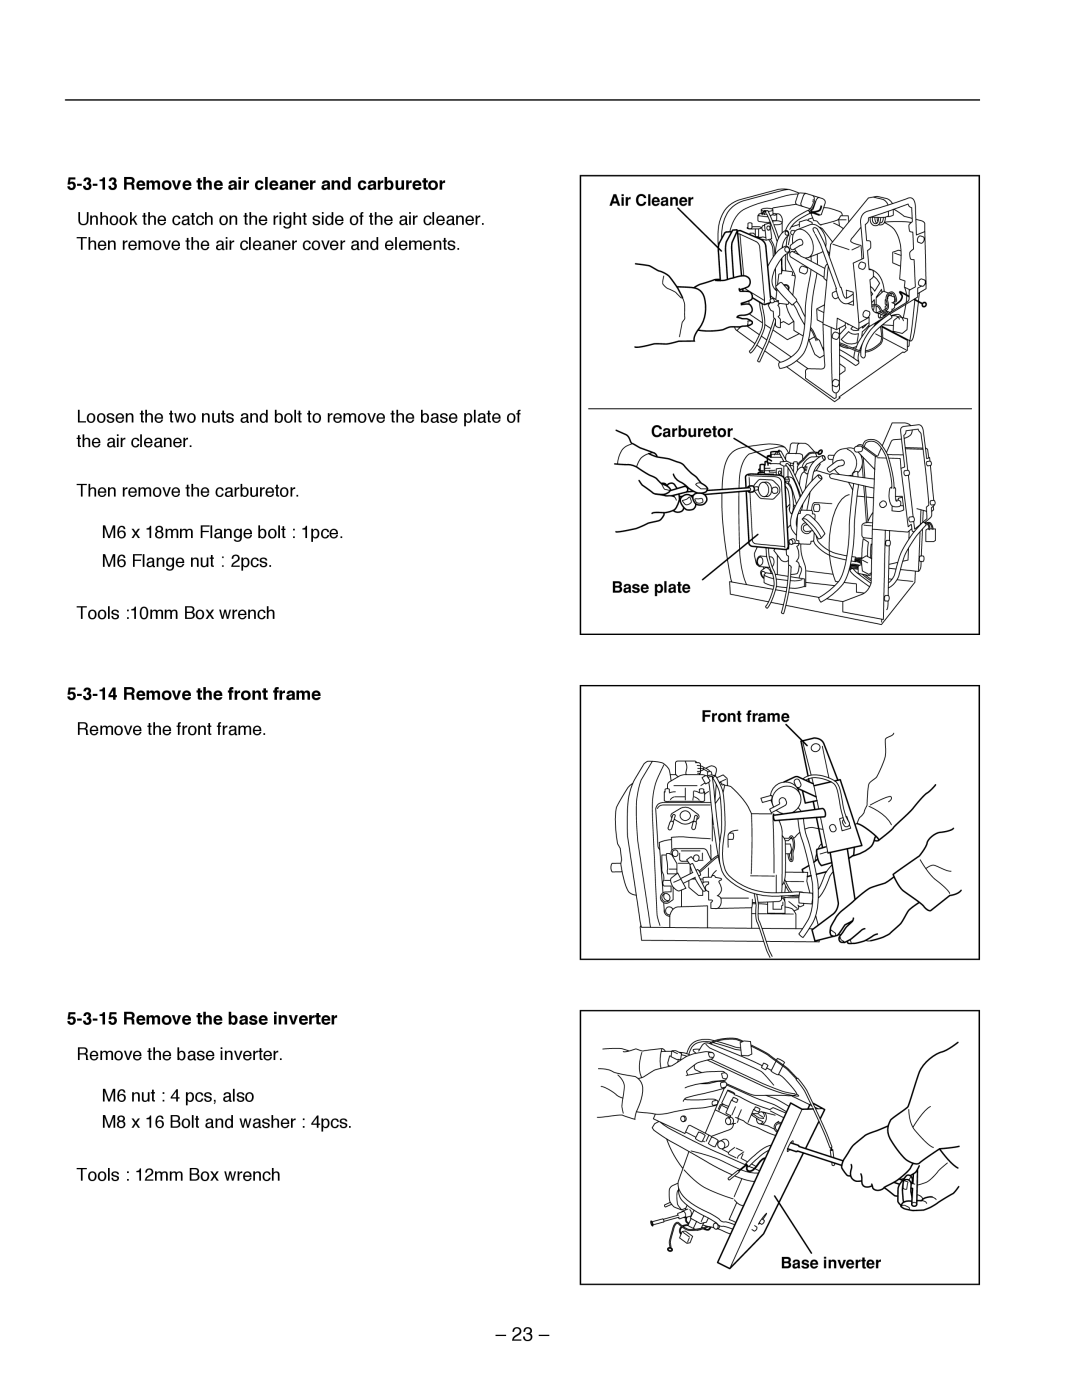 Subaru Robin Power Products R1700i service manual 5-3-13Remove the air cleaner and carburetor, 5-3-14Remove the front frame 